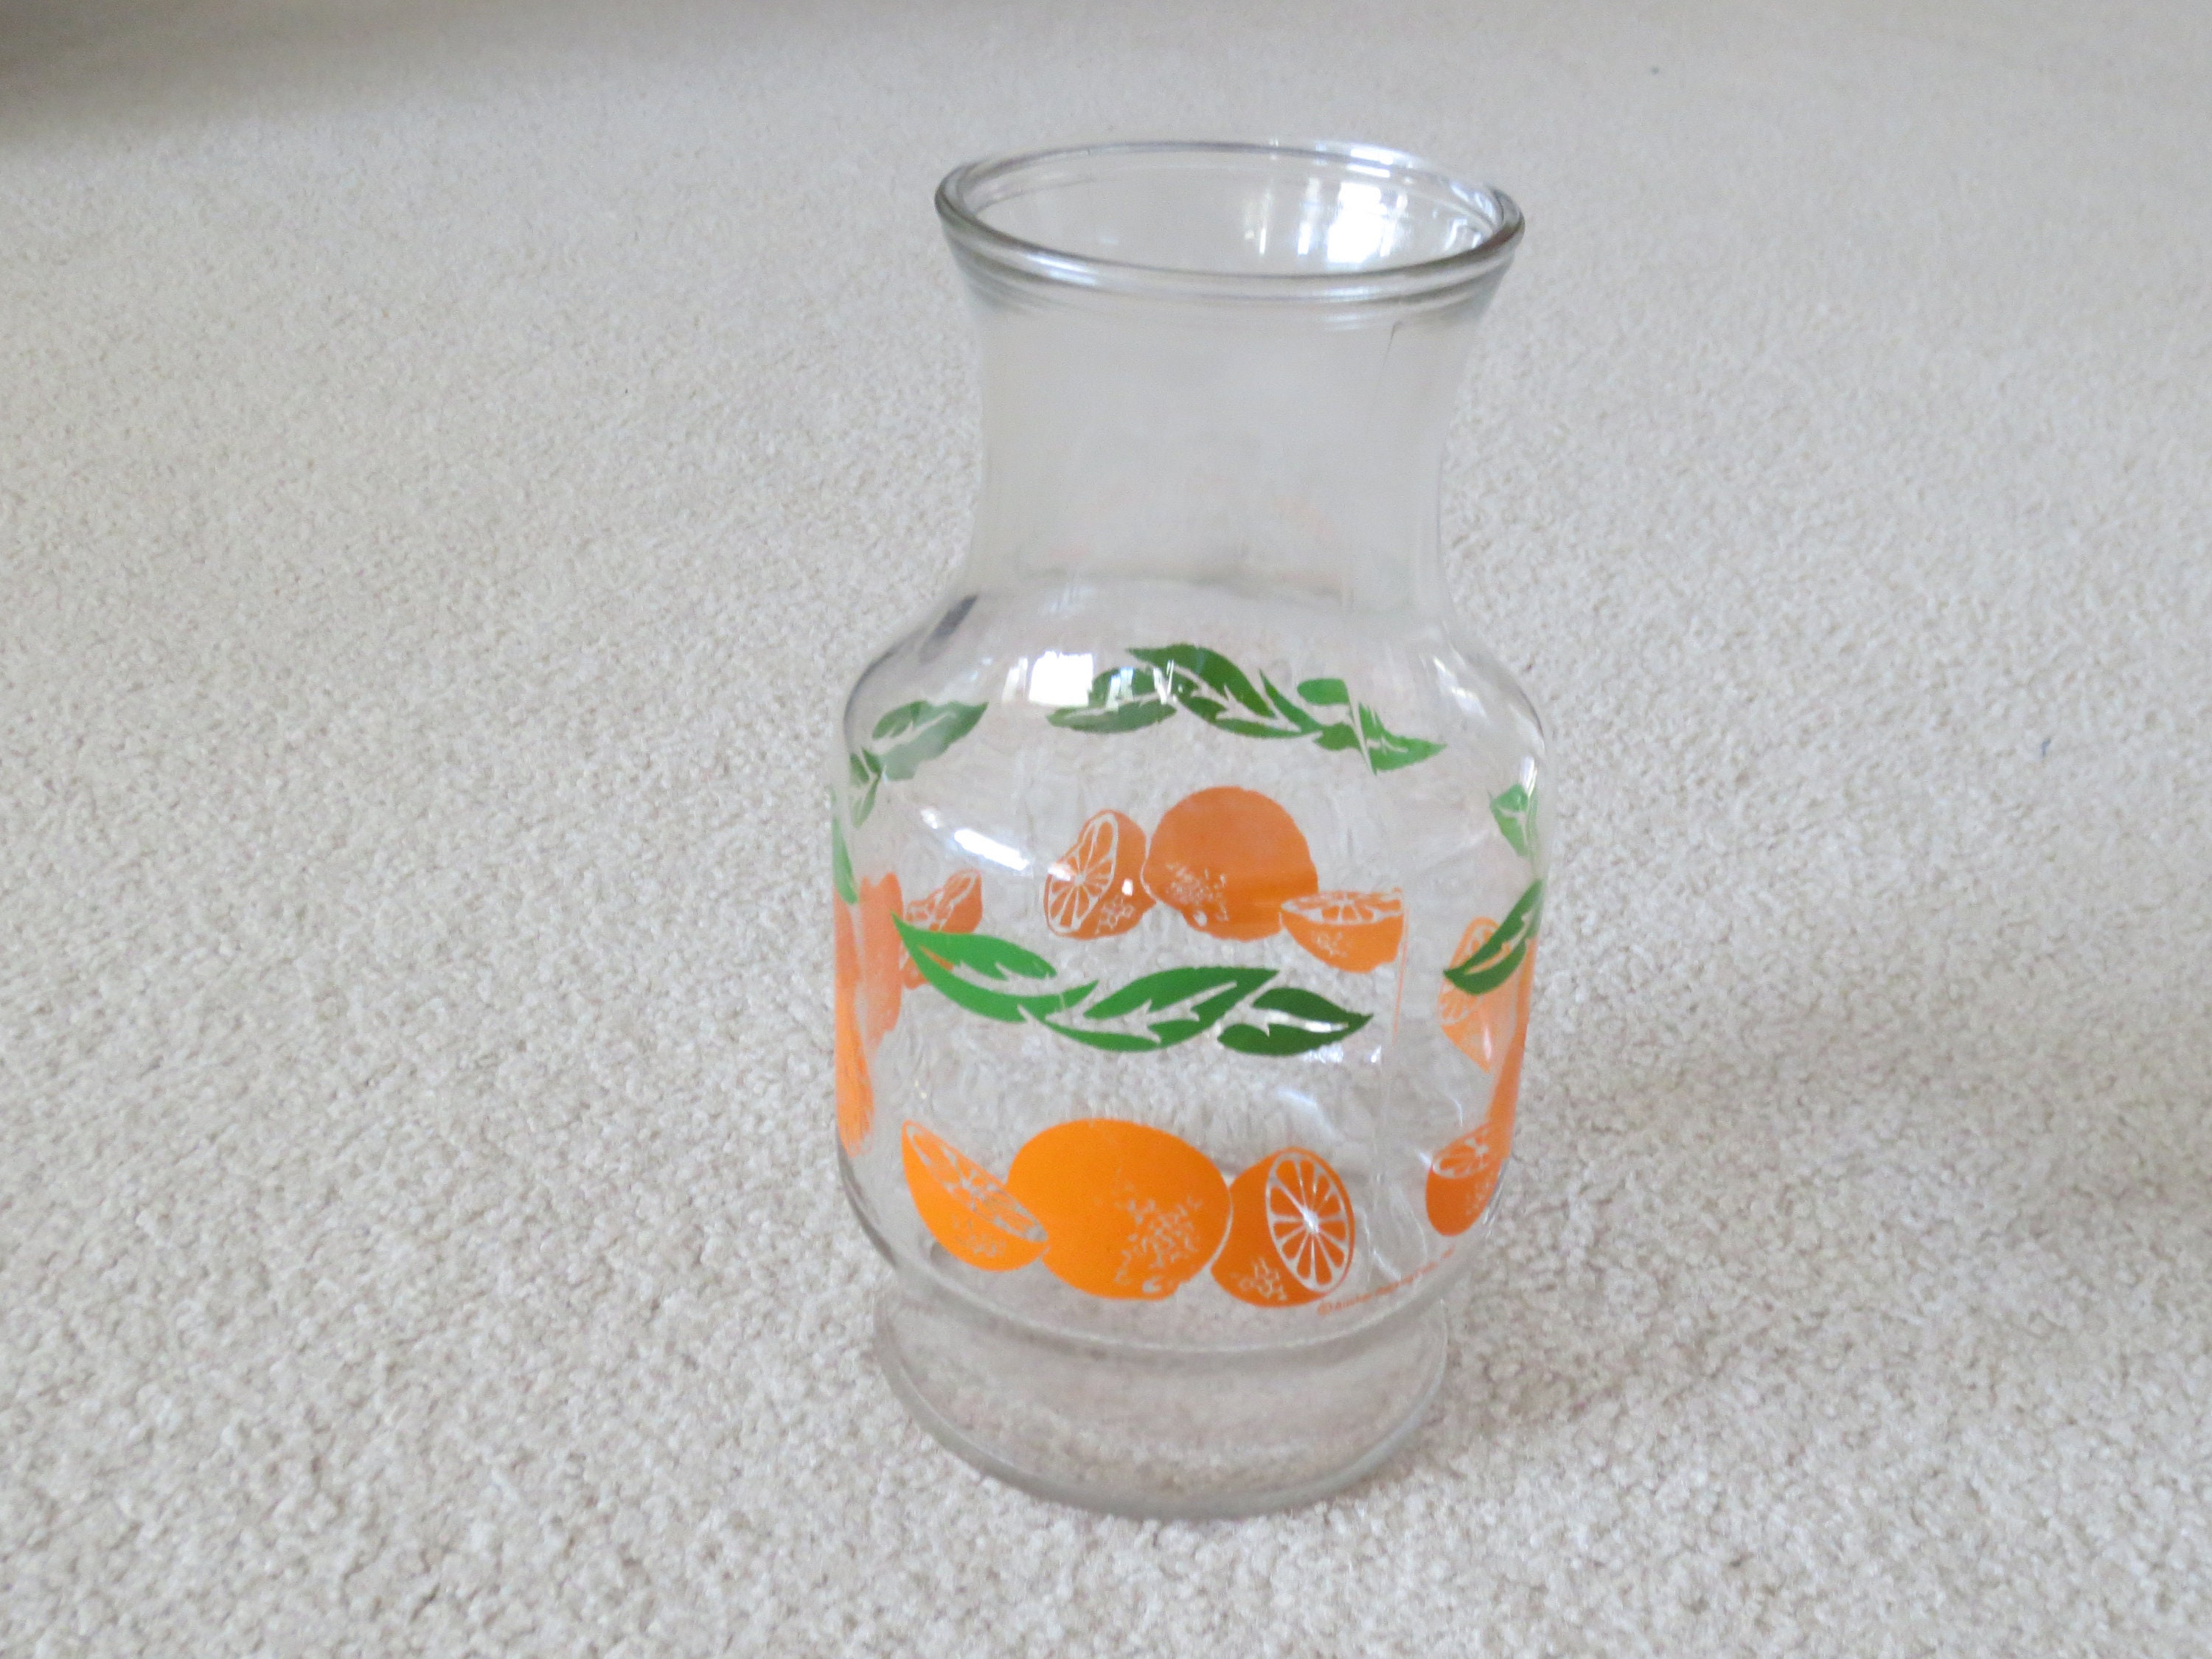 Anchor Hocking Glass Carafe with Oranges & Leaves